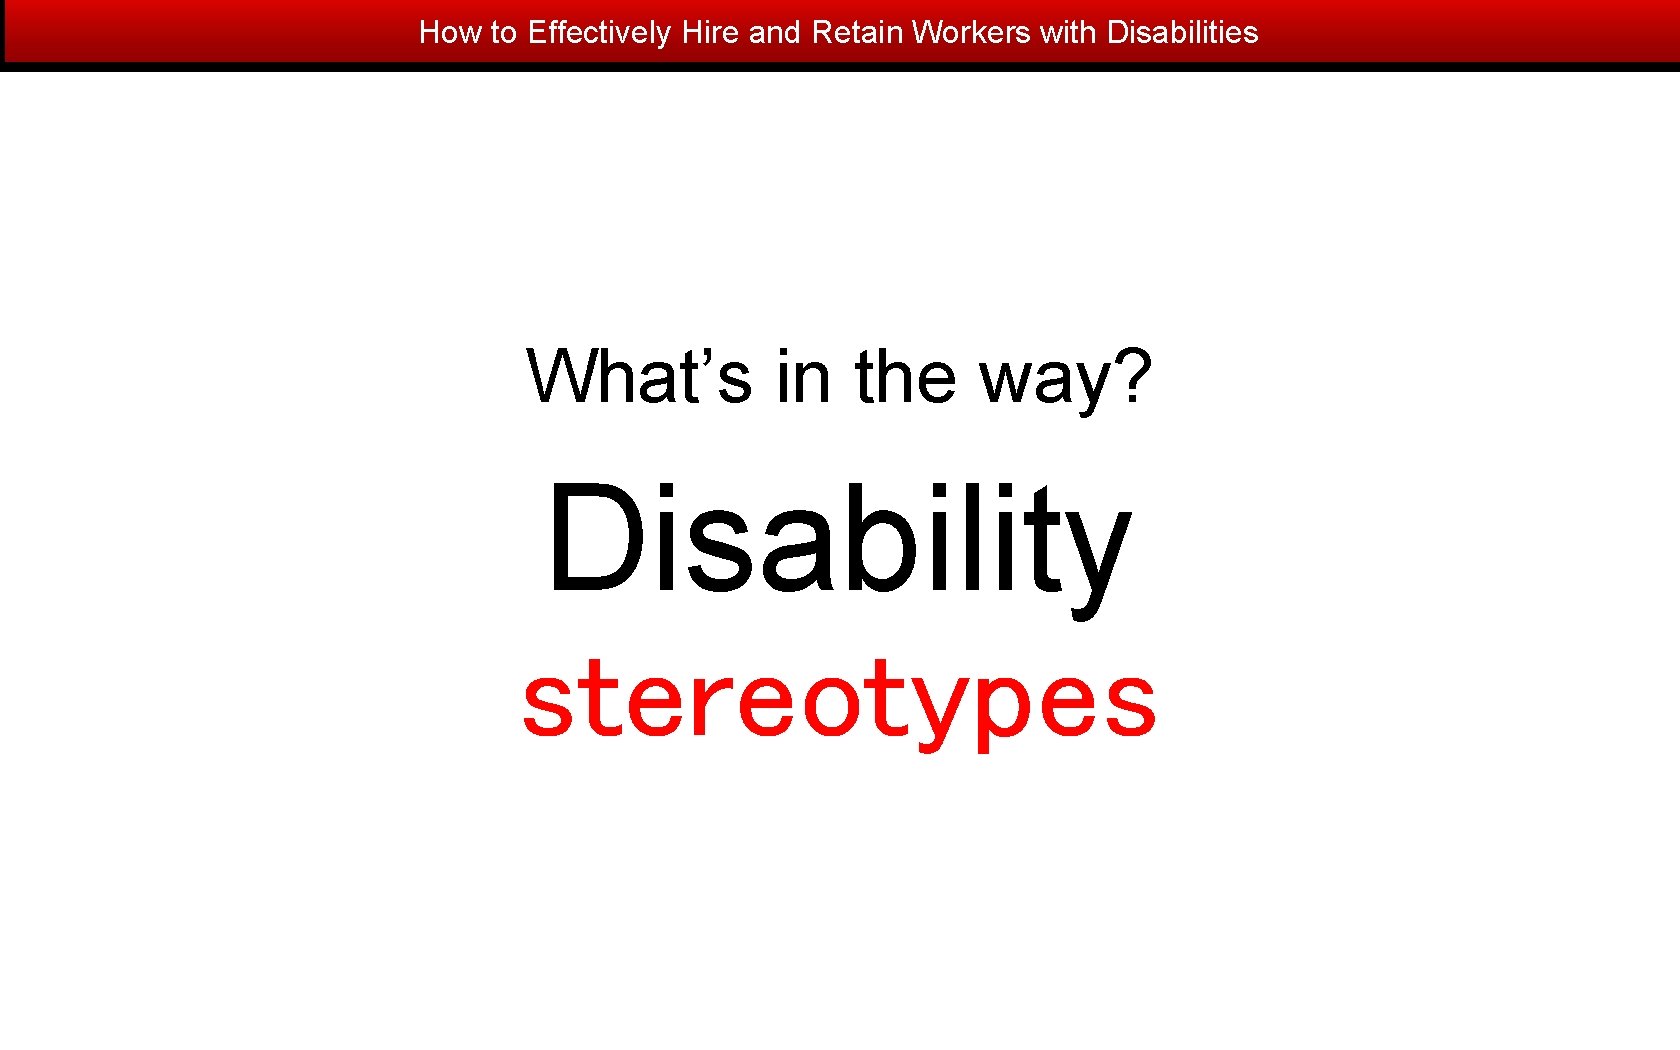 How to Effectively Hire and Retain Workers with Disabilities What’s in the way? Disability